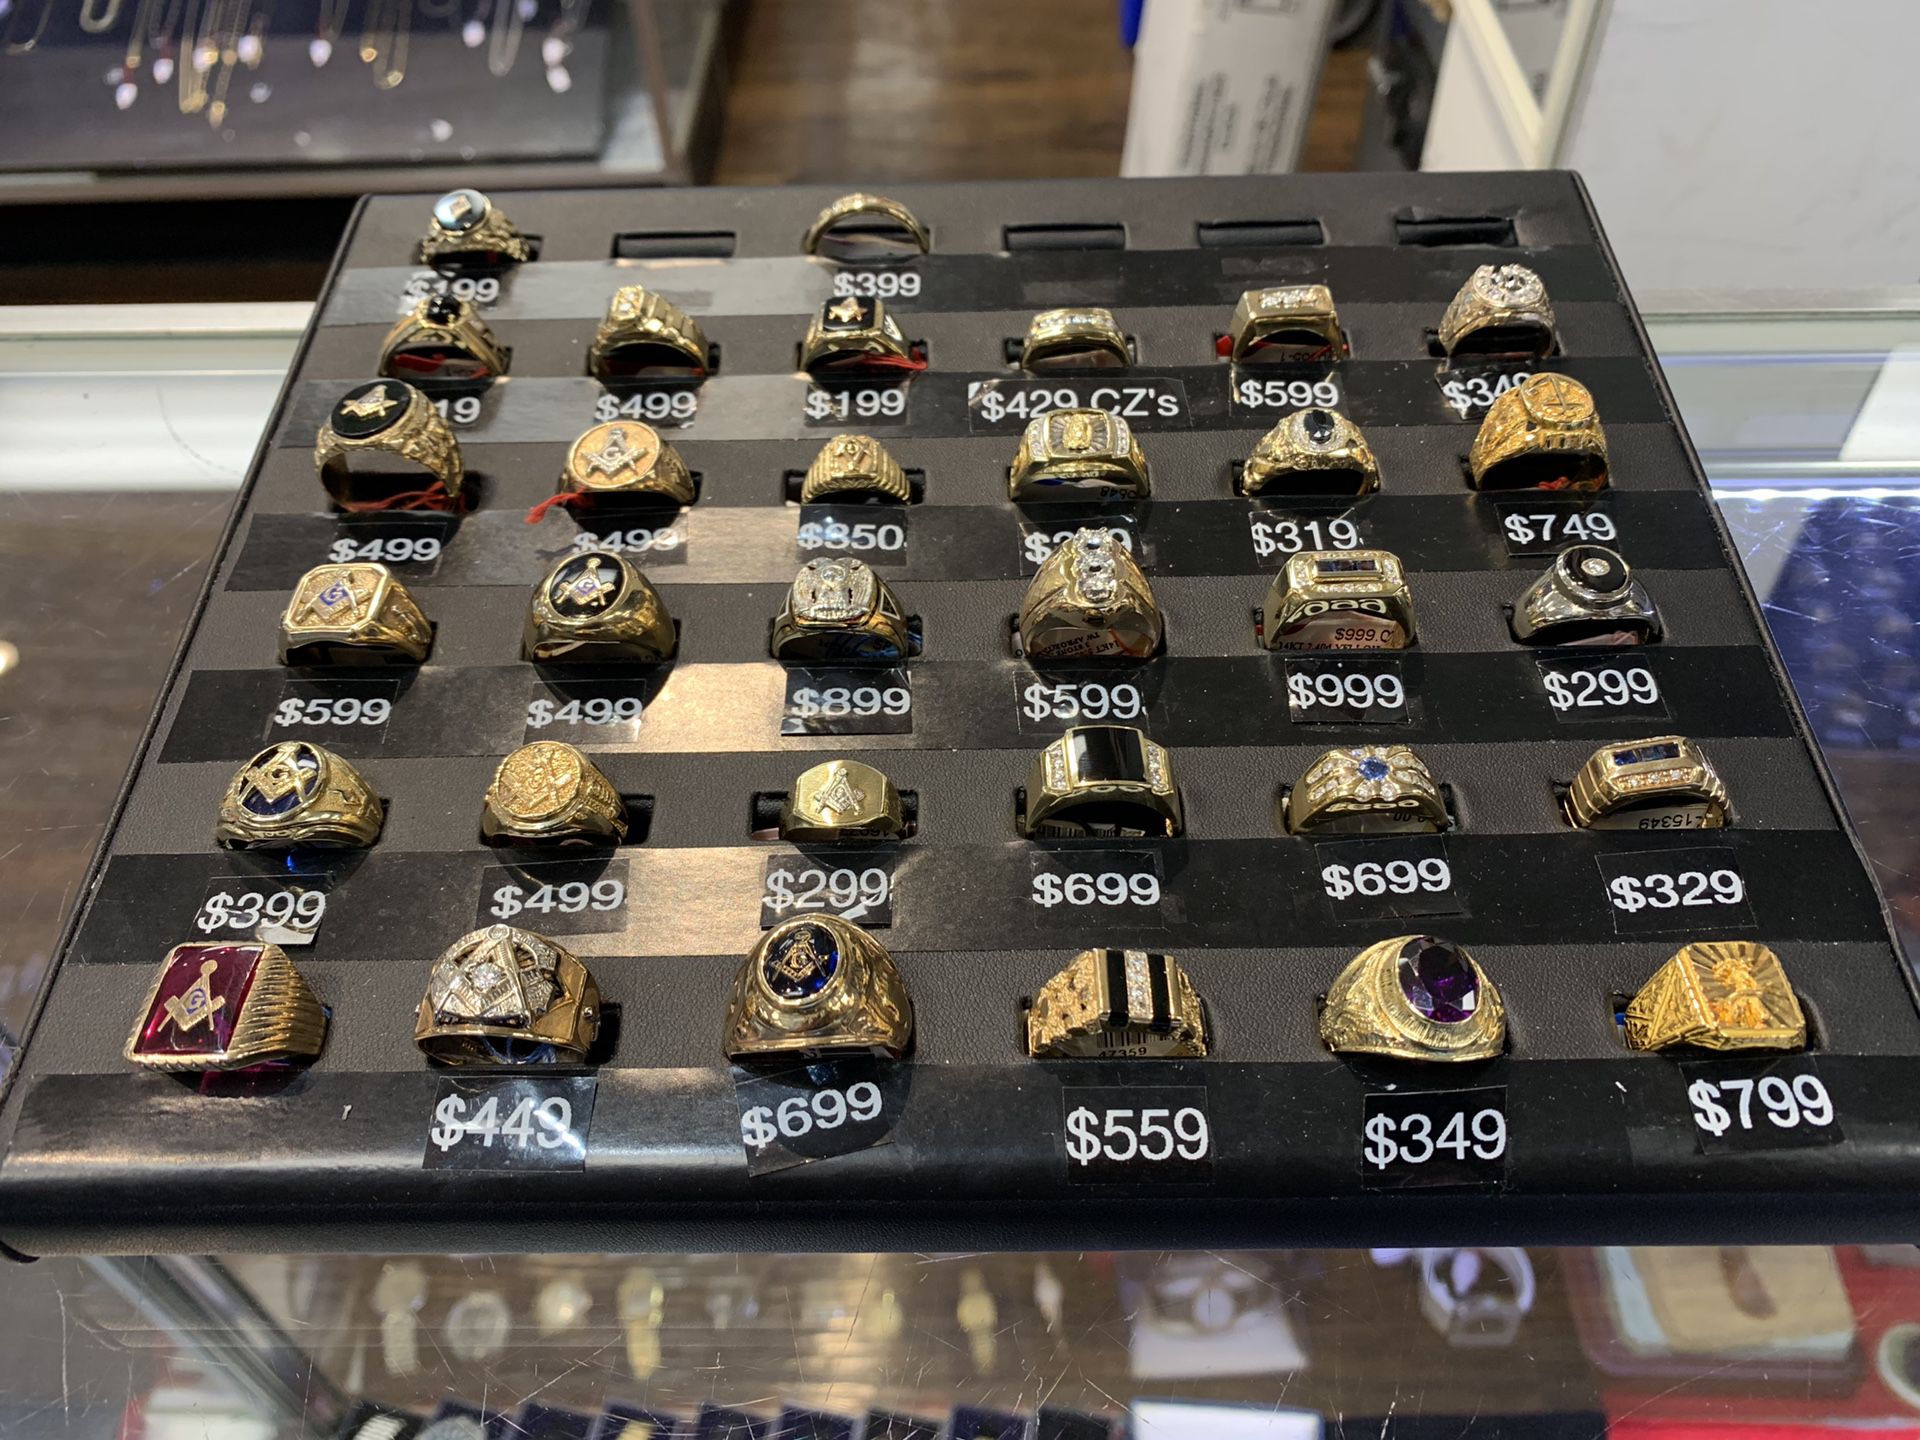 Authentic Men’s rings priced as marked!